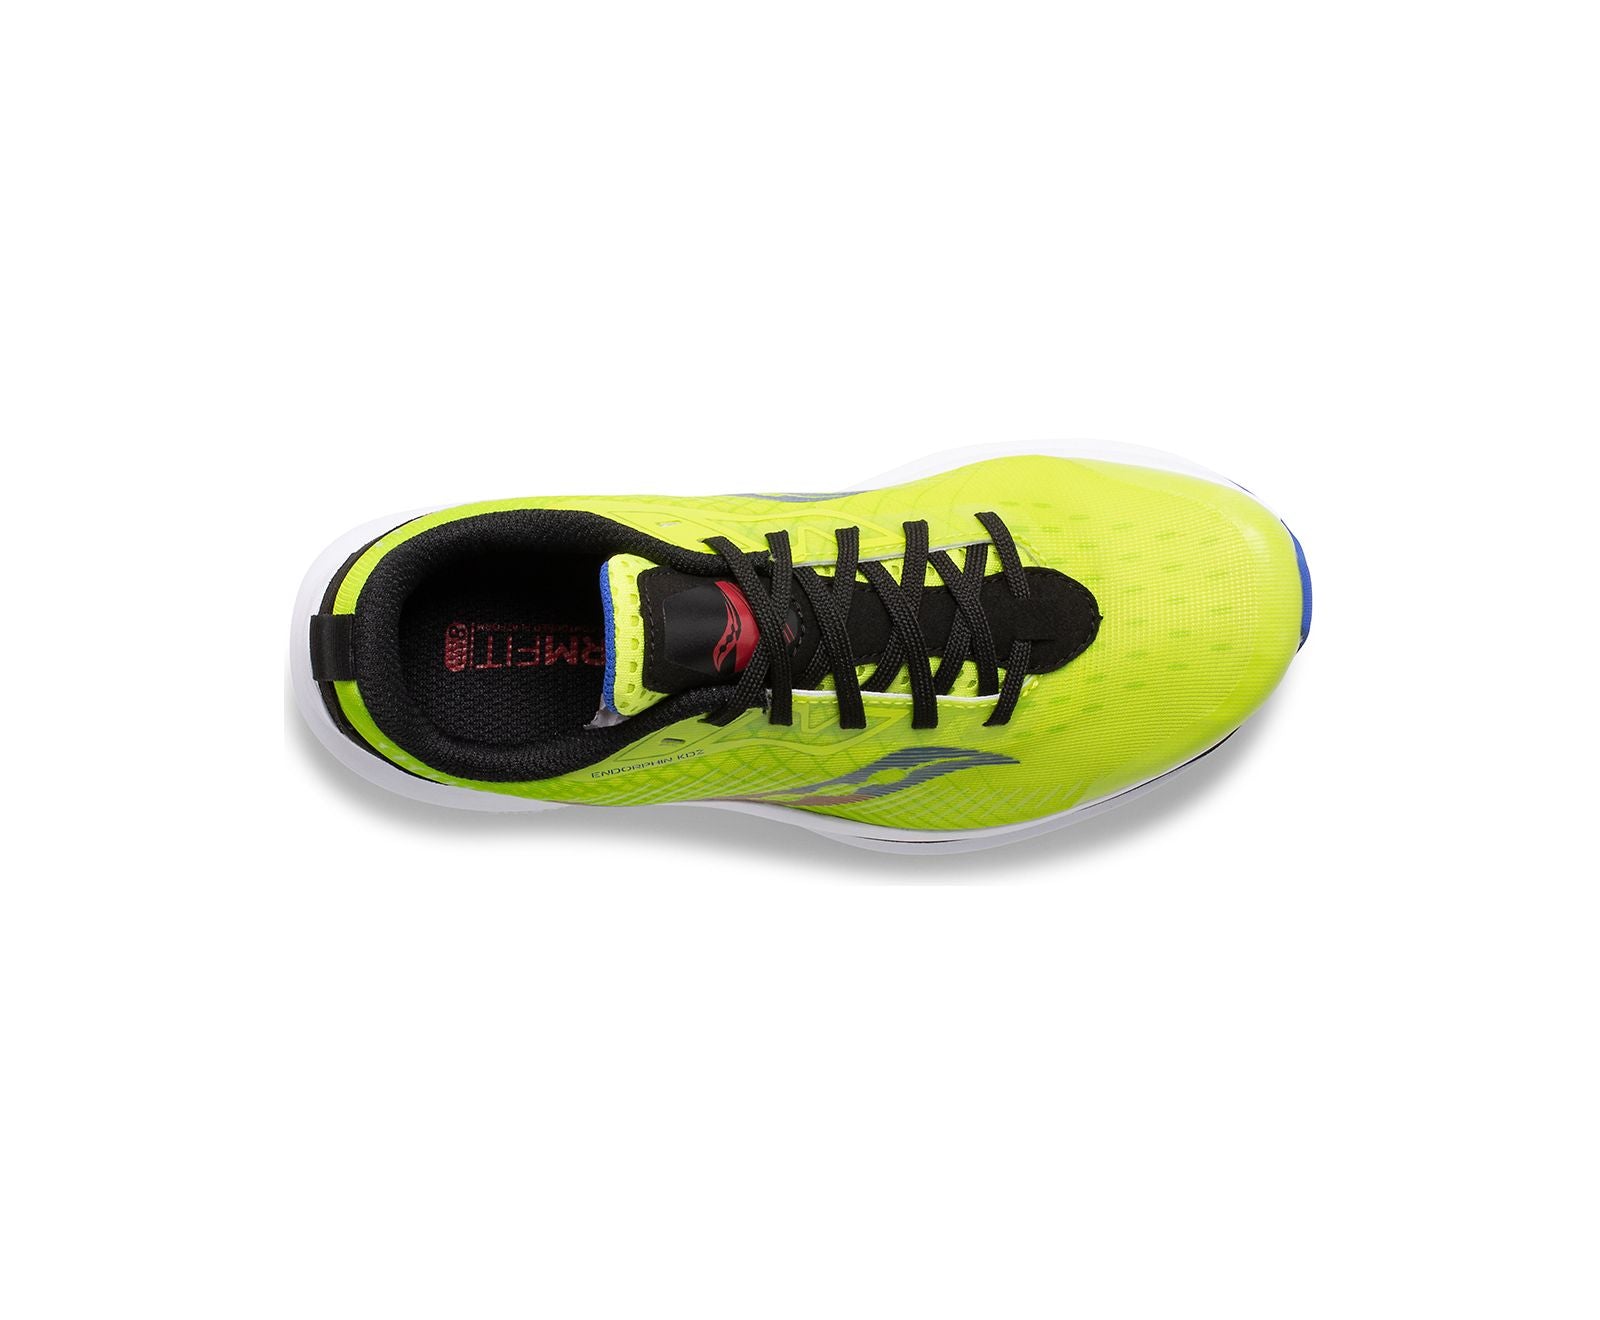 Top view of the Kids Endorphin Sneaker by Saucony in Acid/Lime